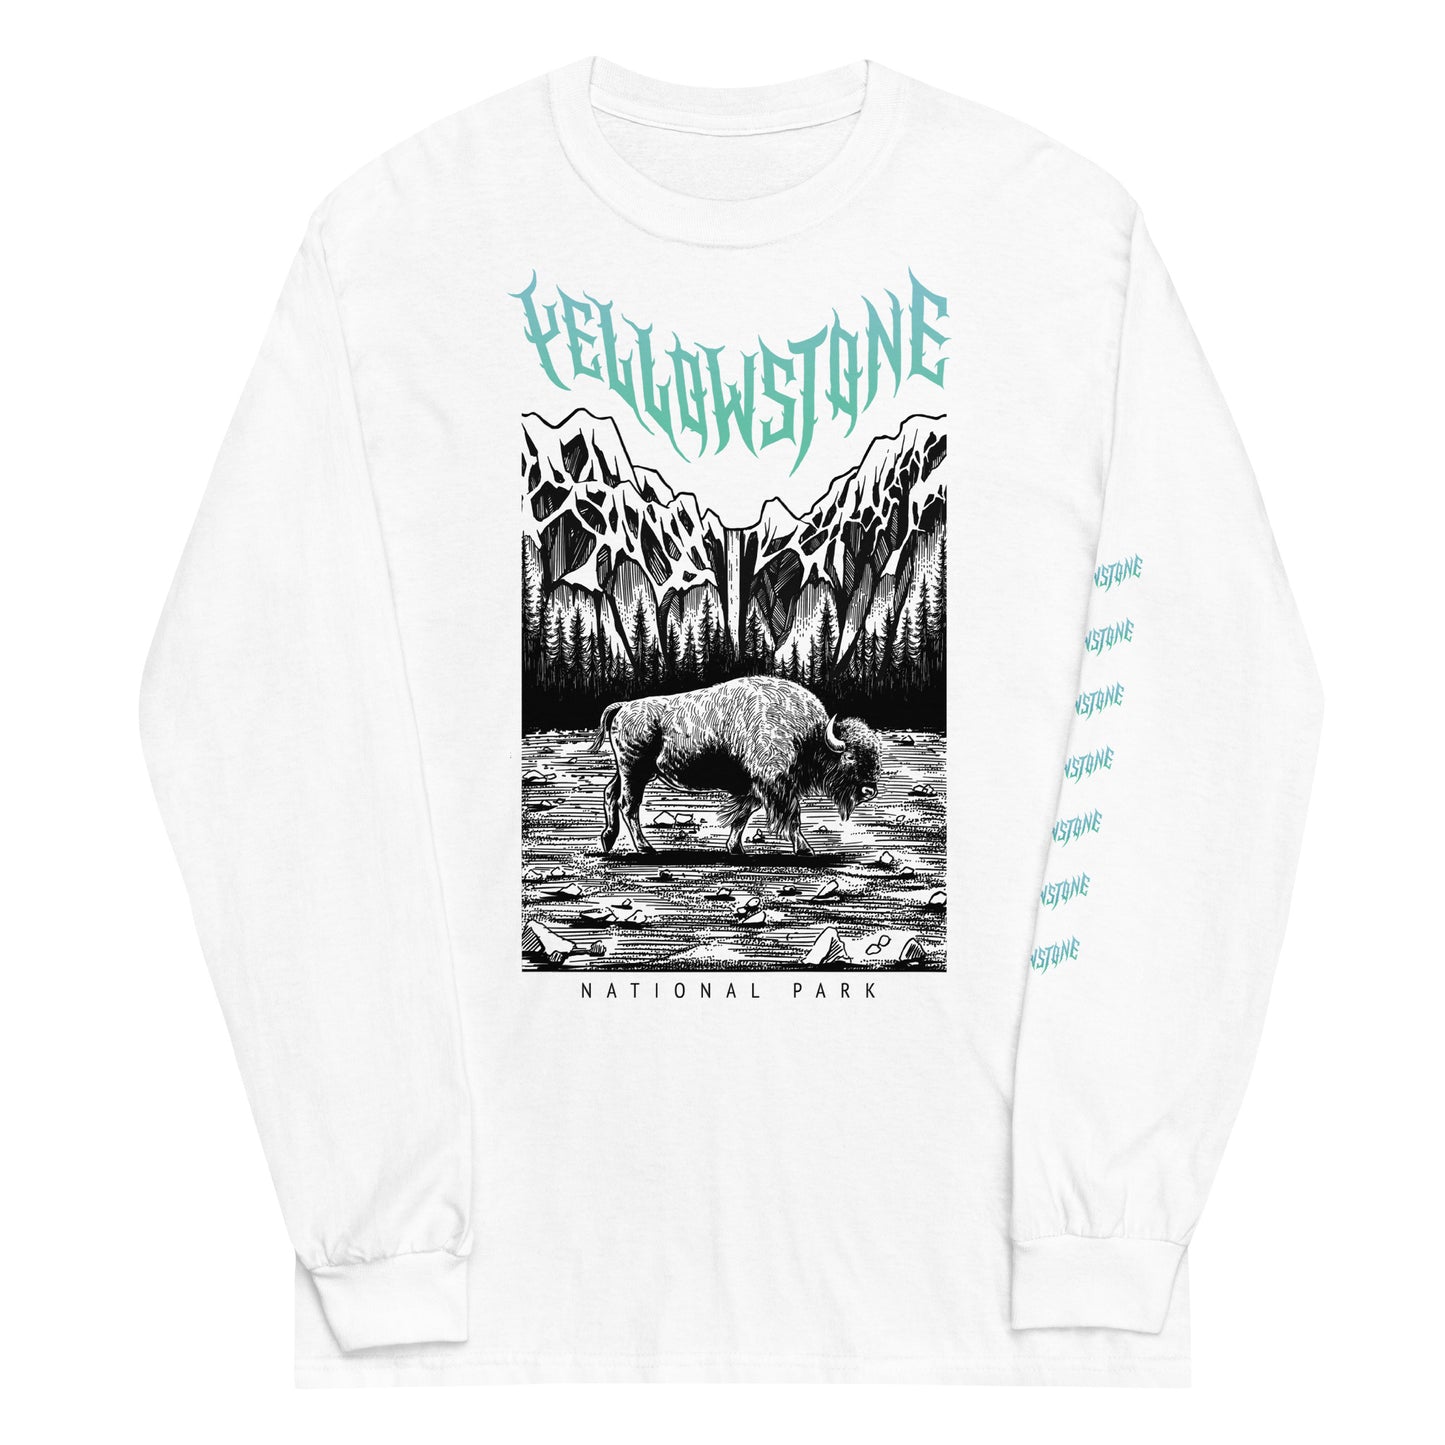 Yellowstone National Park Special Edition White Long Sleeve Death Metal T-Shirt